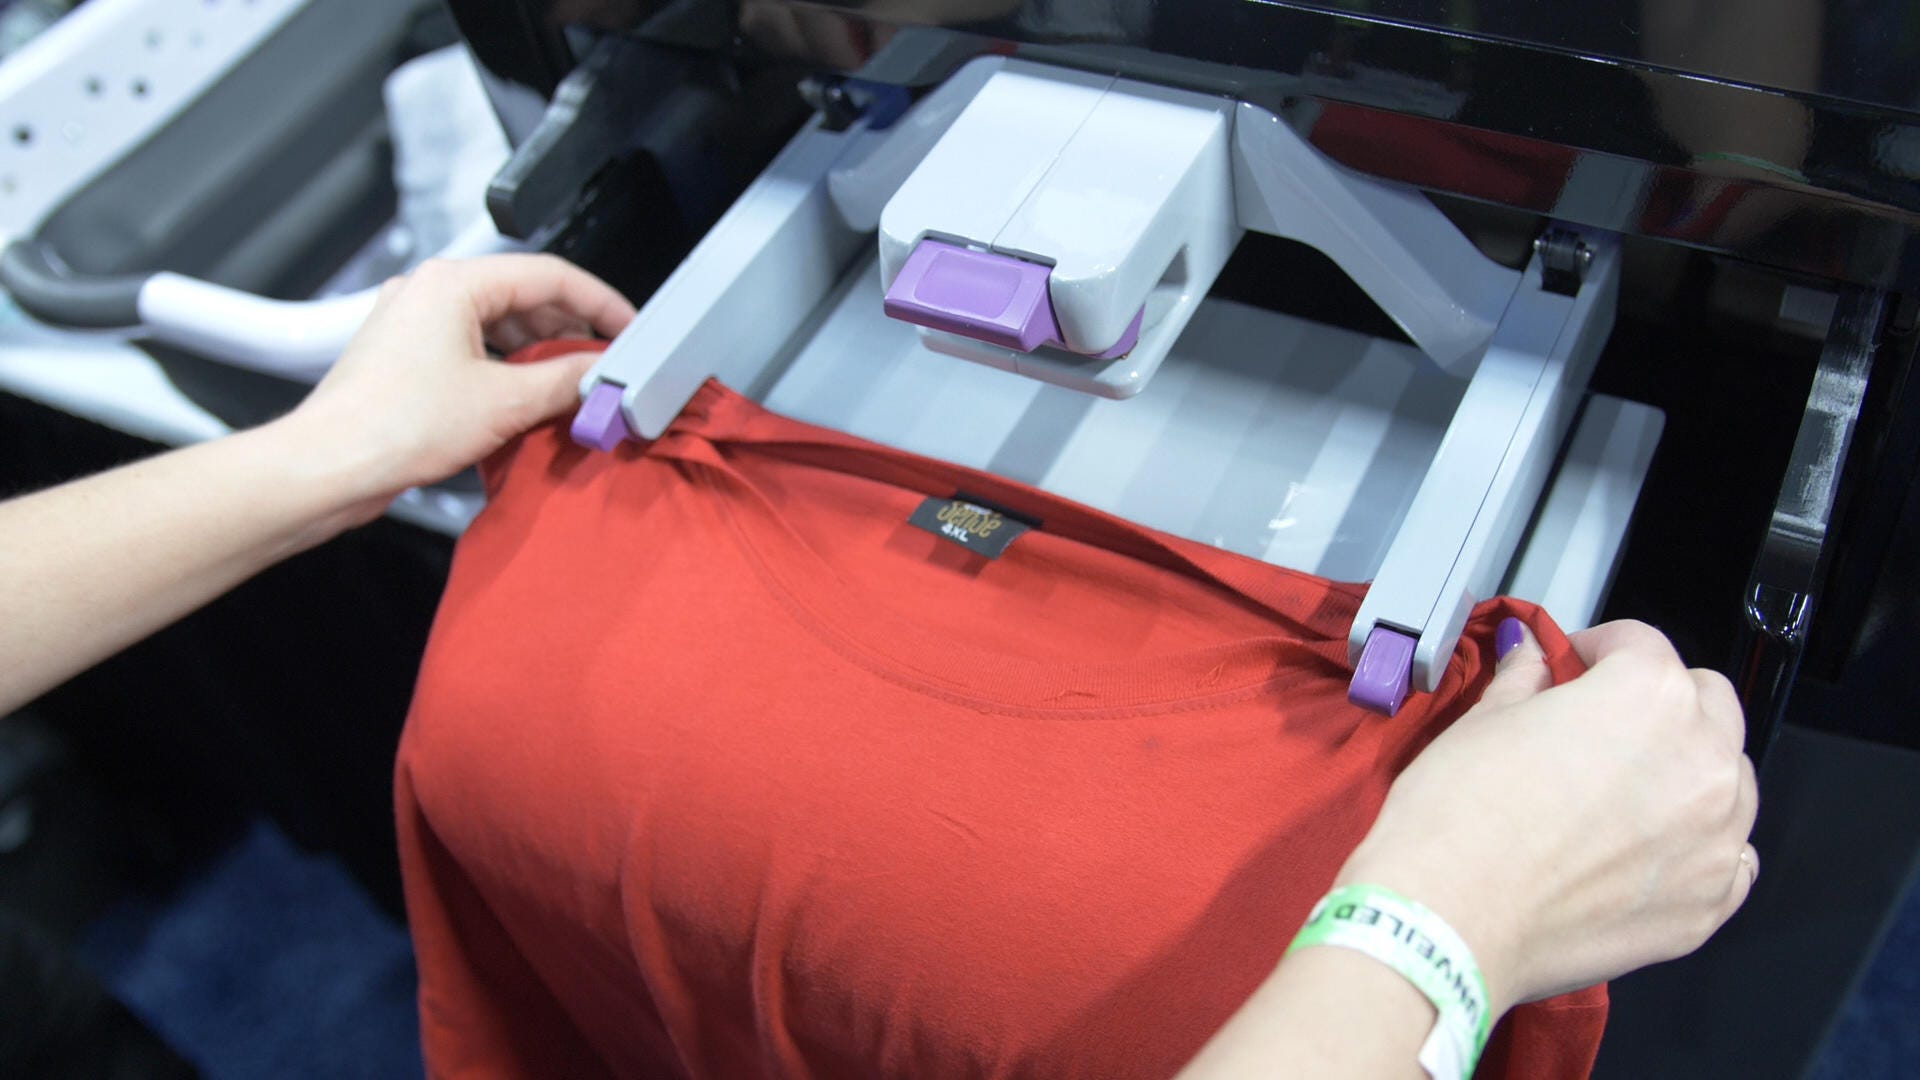 Foldimate robot at CES 2019 folds your clothes so you don't have to - Video  - CNET